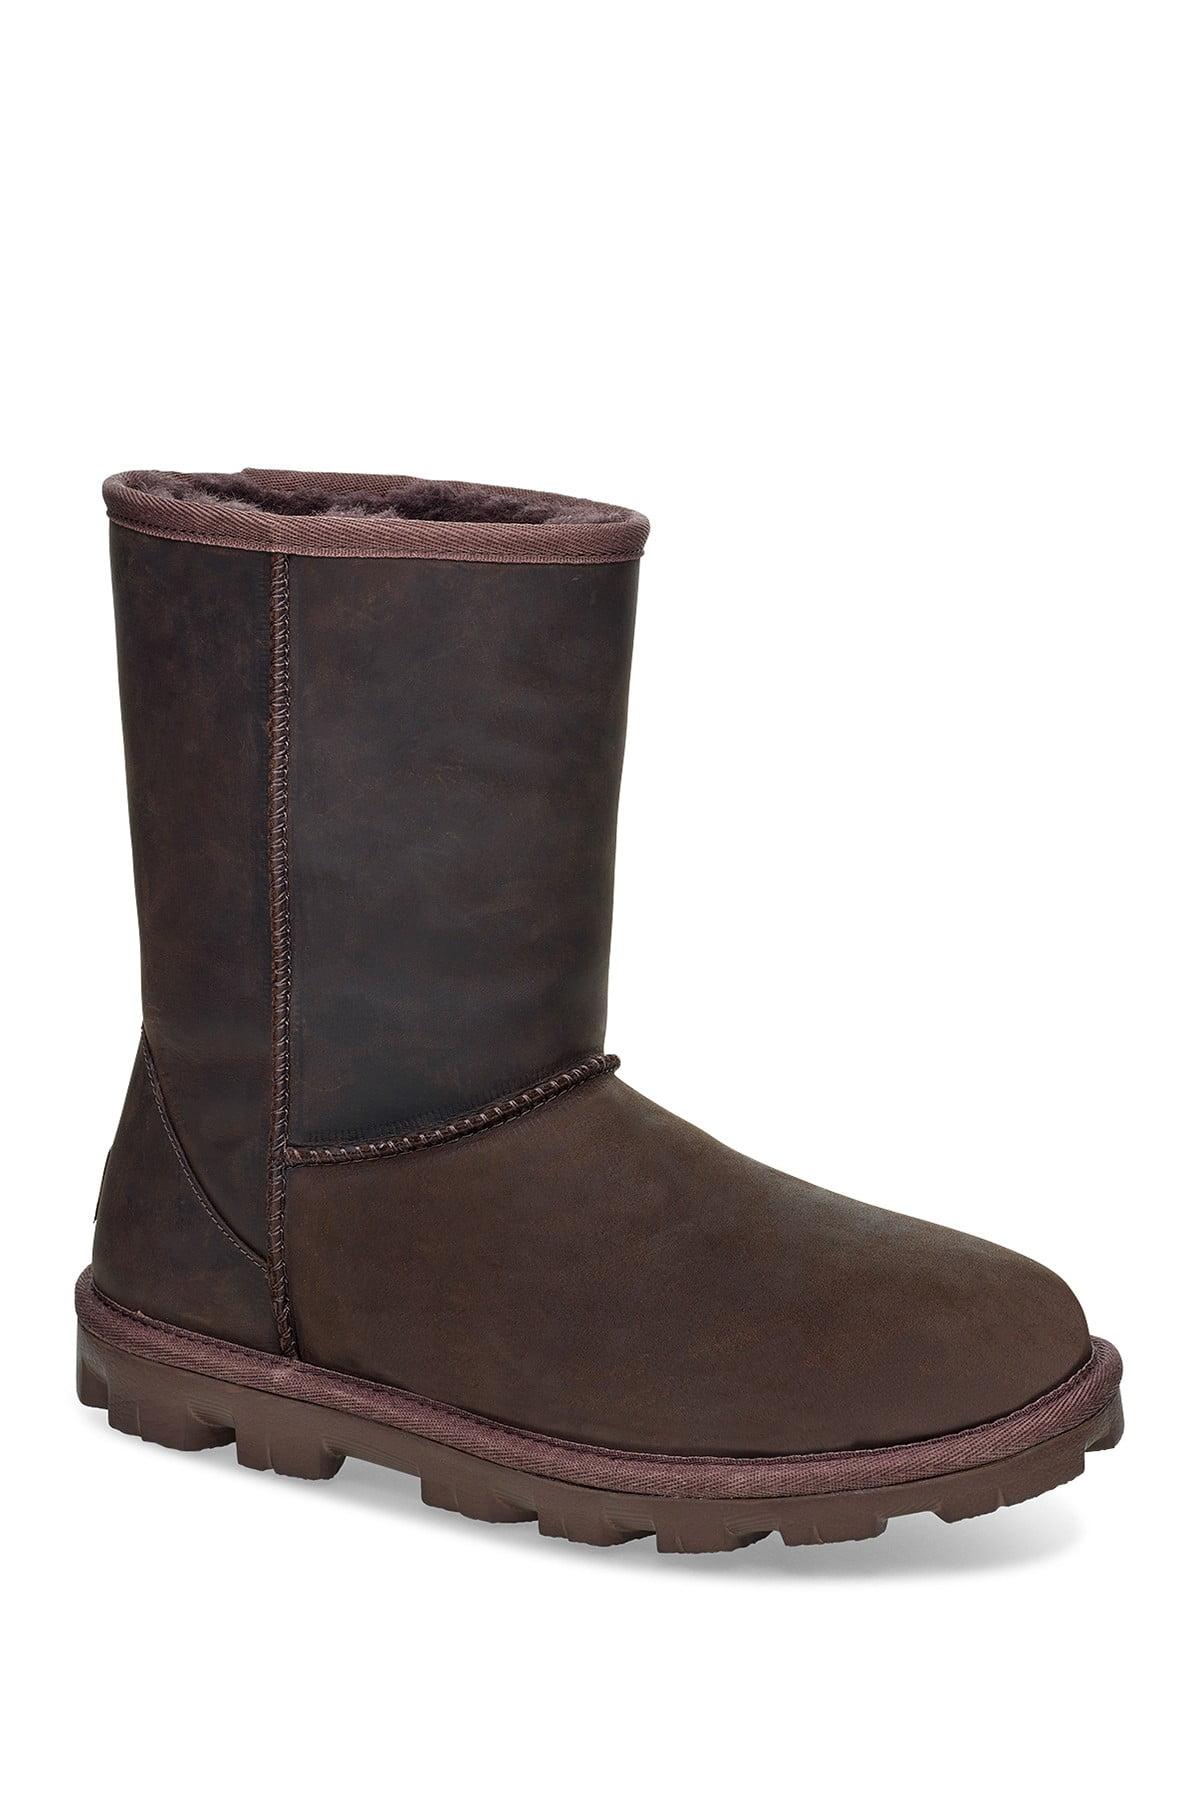 UGG Essential Short Pure Wool Lined Leather Boot in Chocolate (Brown) - Lyst